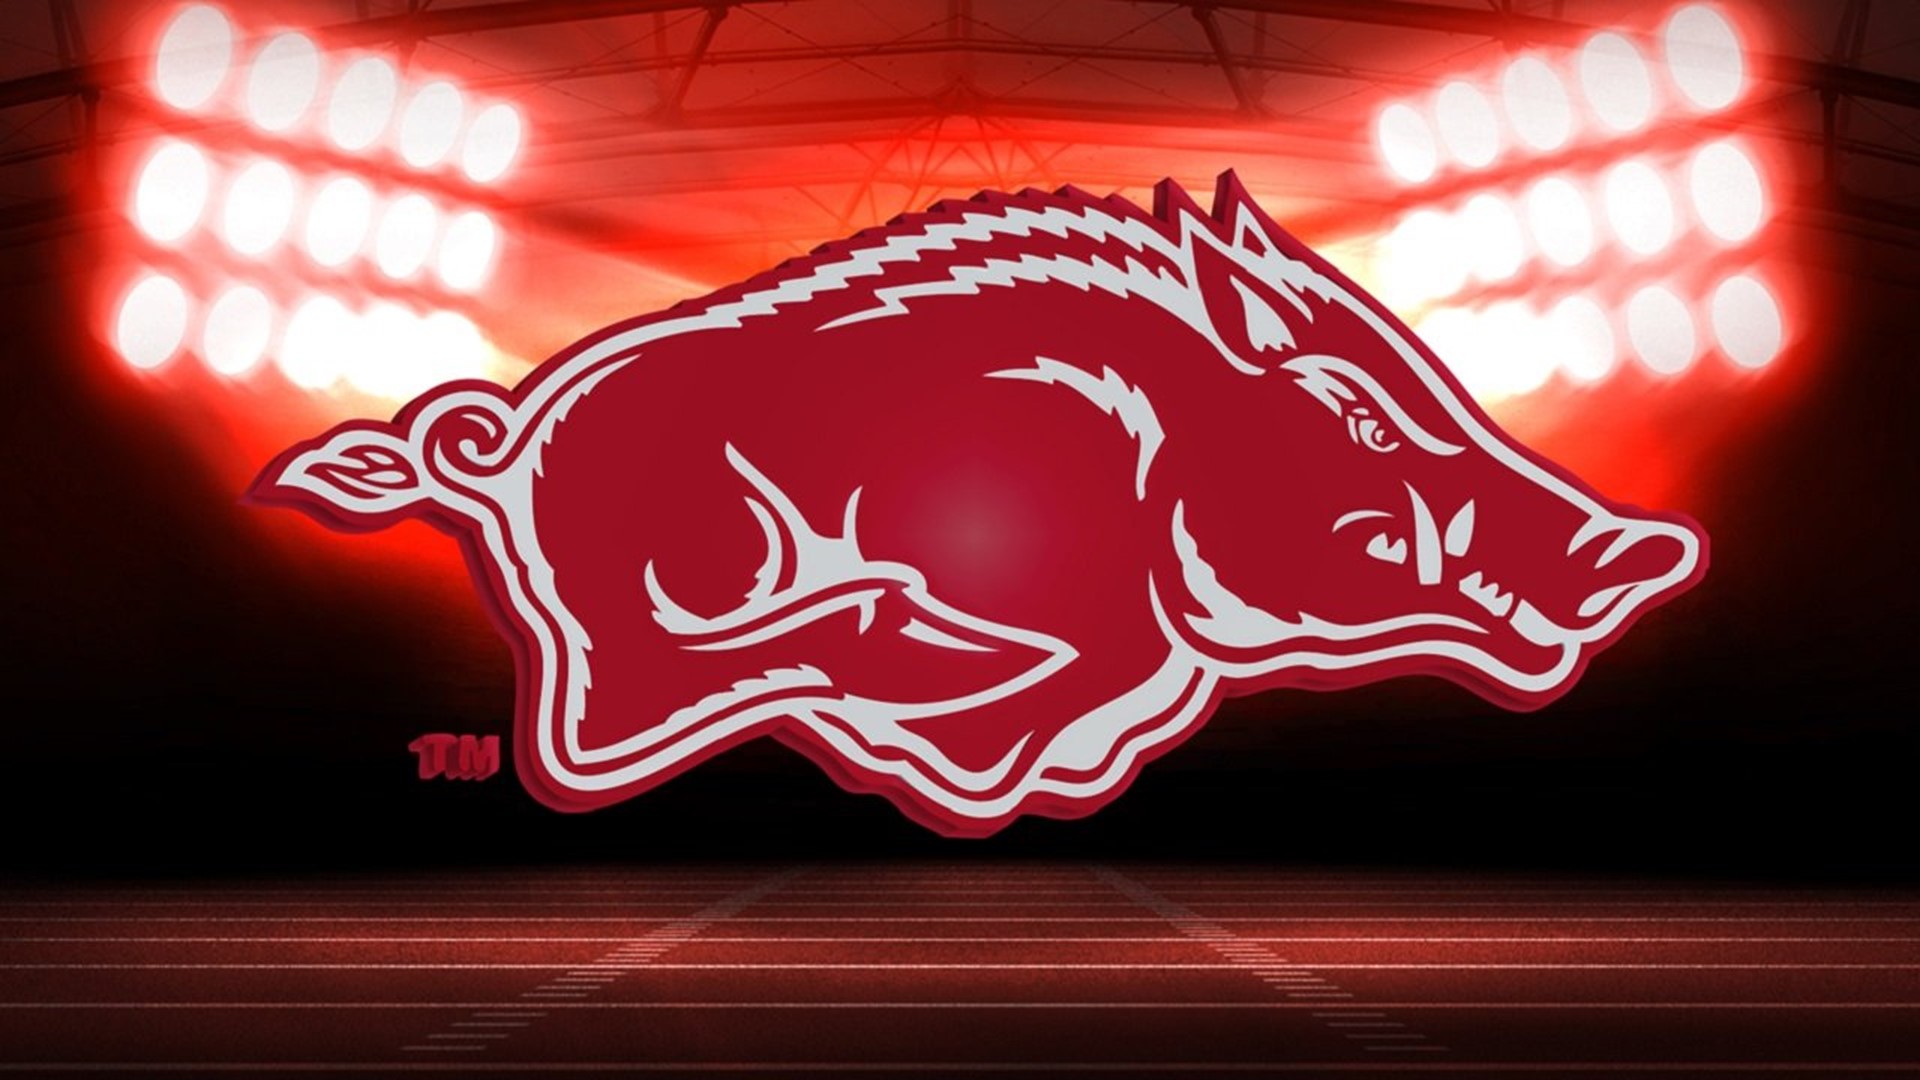 City Of Fayetteville Offers 5 Parking For Razorback Game